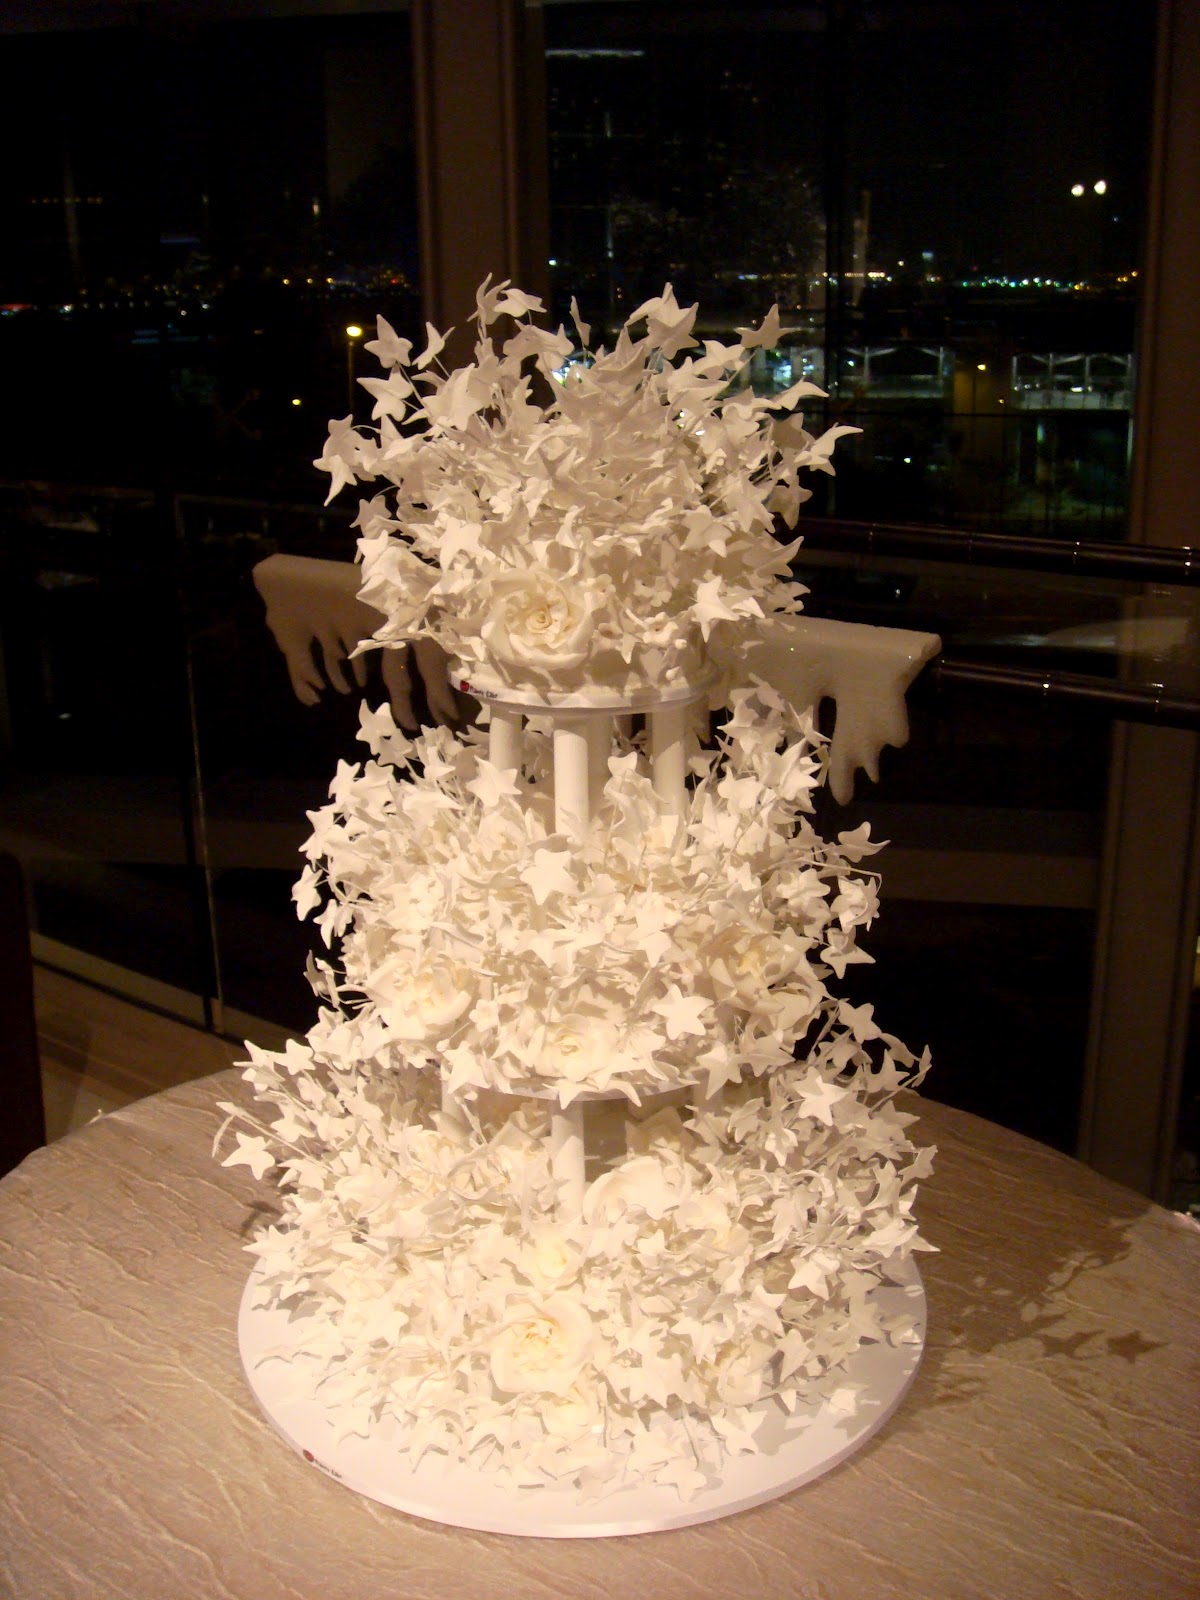  Amazing Wedding Cakes  Pictures Wallpaper Pictures